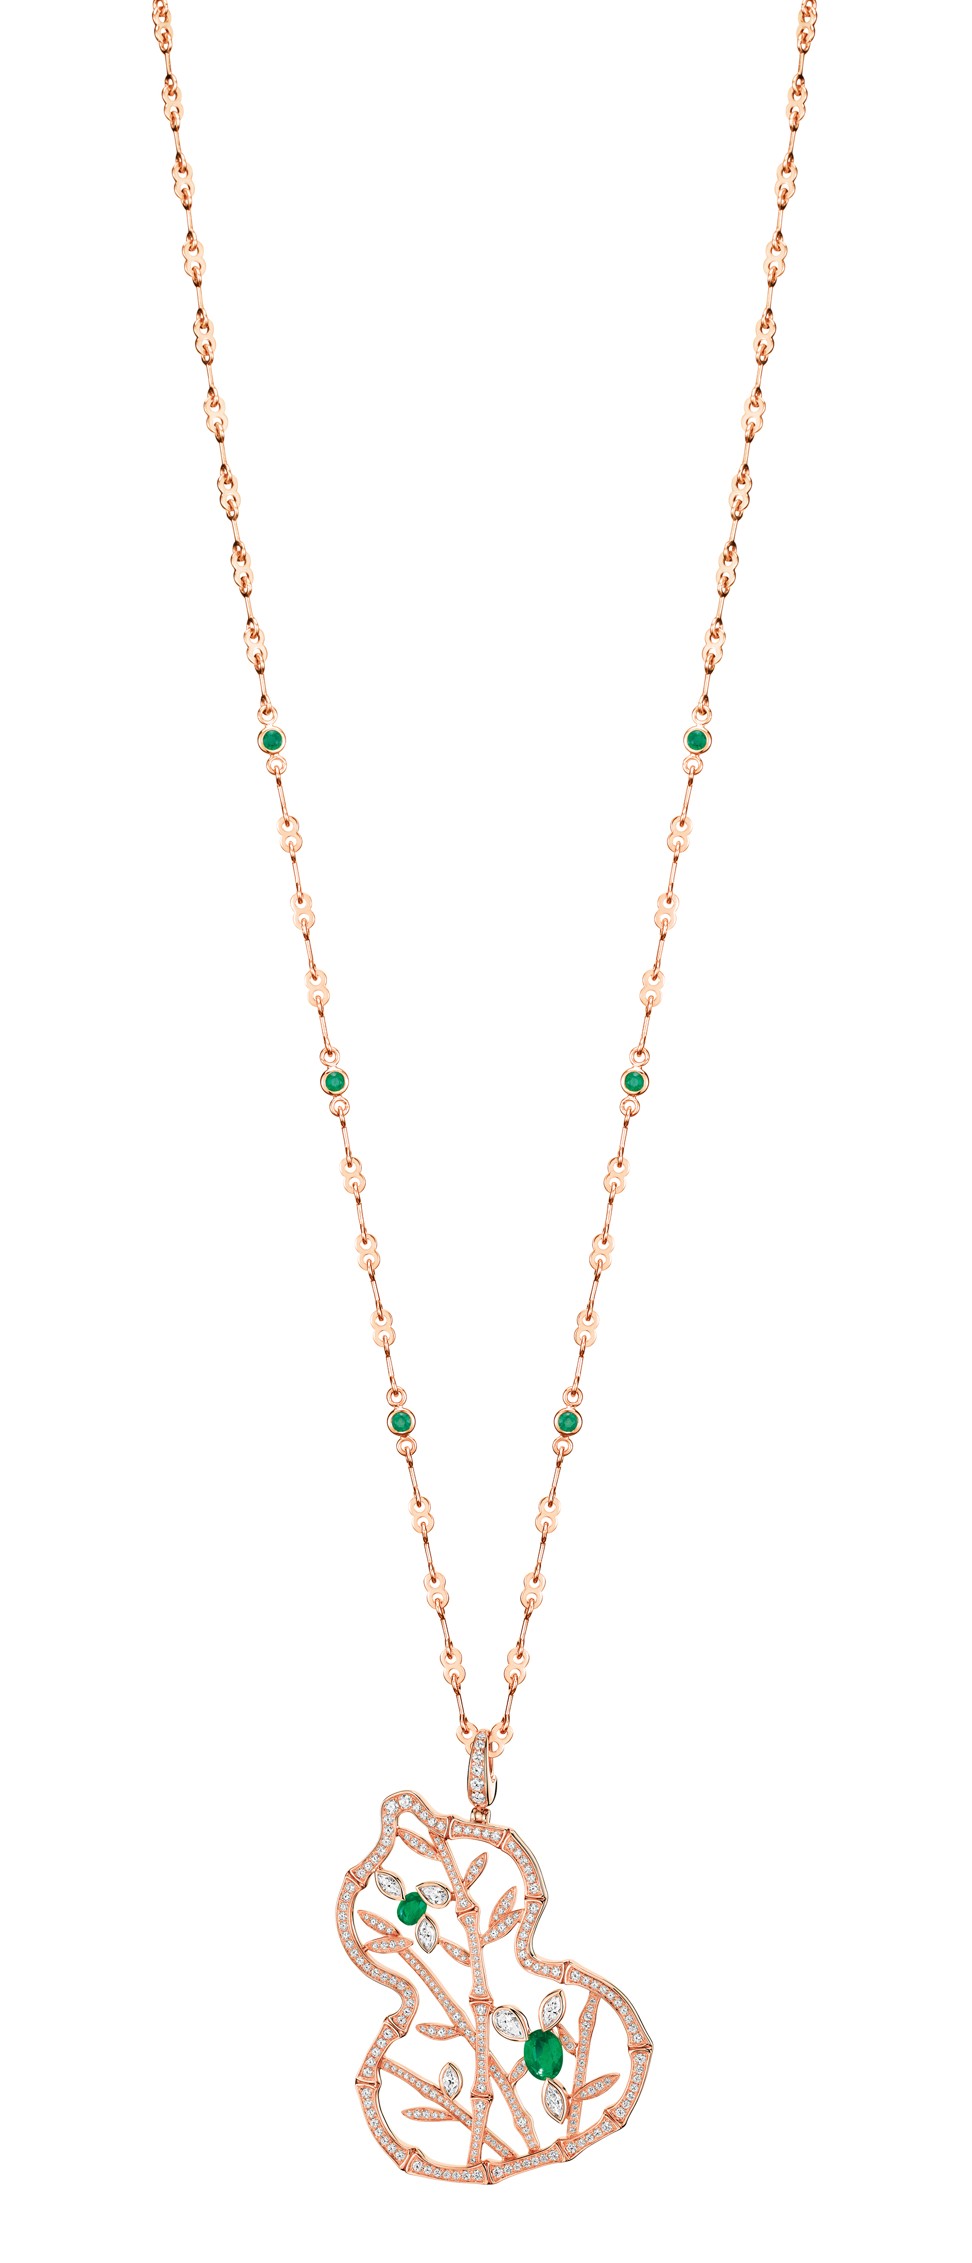 Qeelin’s fine jewellery Wulu Bamboo Lace necklace, which features a 32-inch rose gold chain.